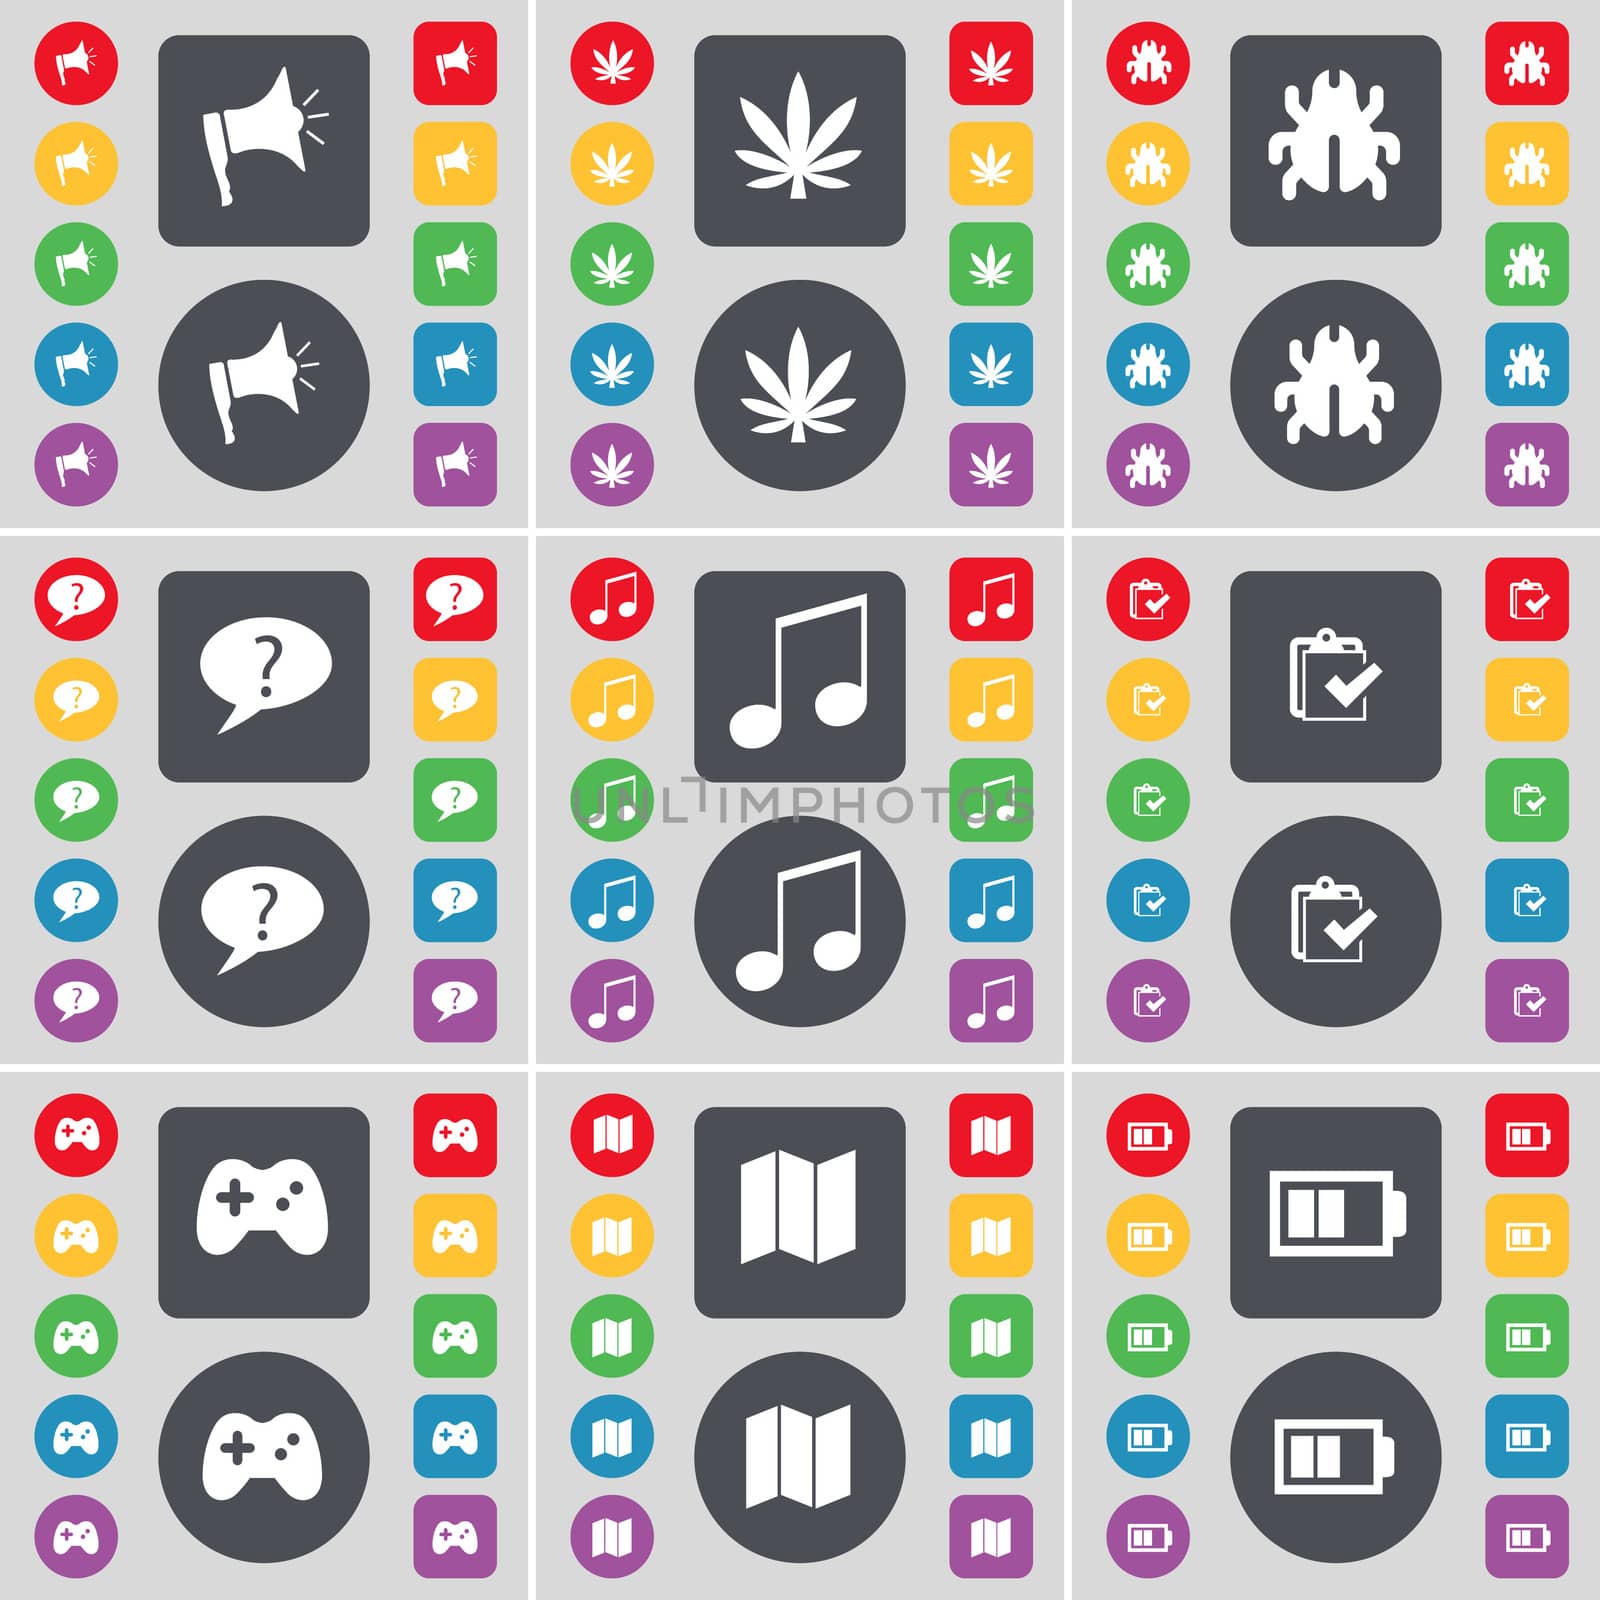 Megaphone, Marijuana, Bug, Chat bubble, Note, Survey, Gamepad, Map, Battery icon symbol. A large set of flat, colored buttons for your design. illustration